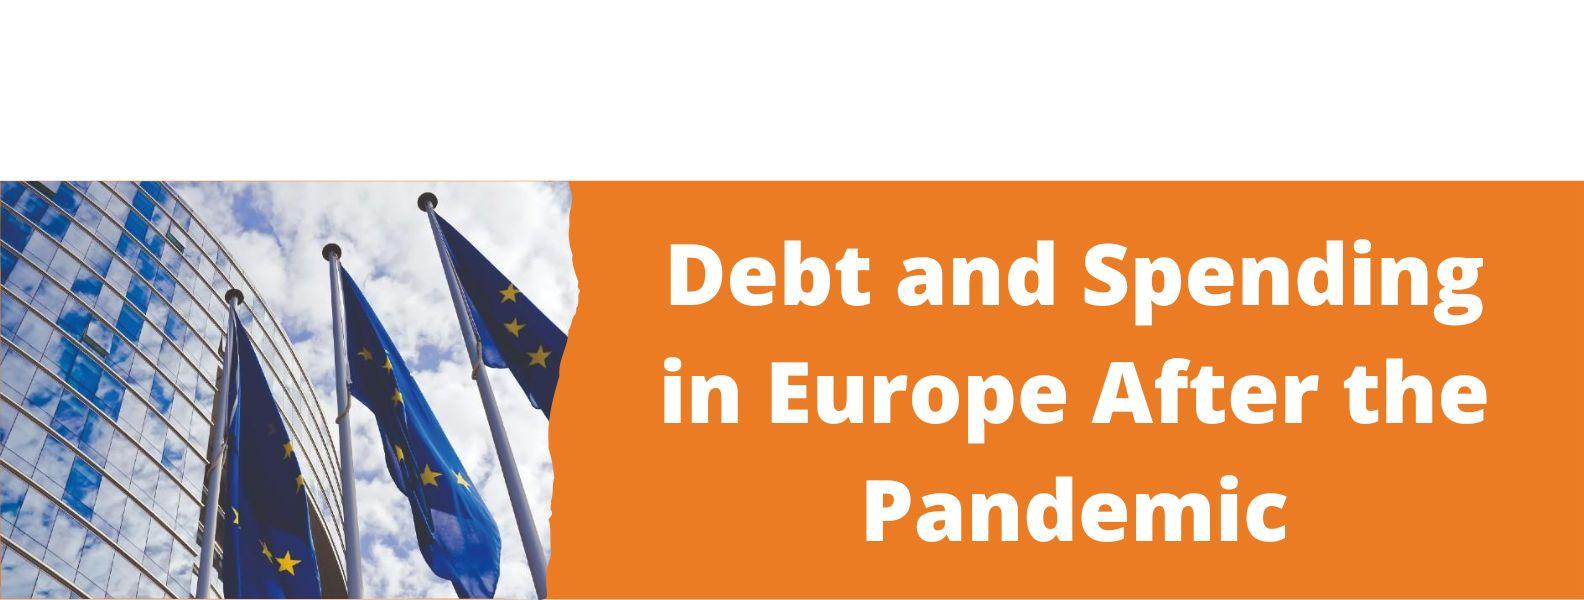 Link to related stories. Image: Flags of Europe. Story headline: Debt and Spending in Europe After the Pandemic